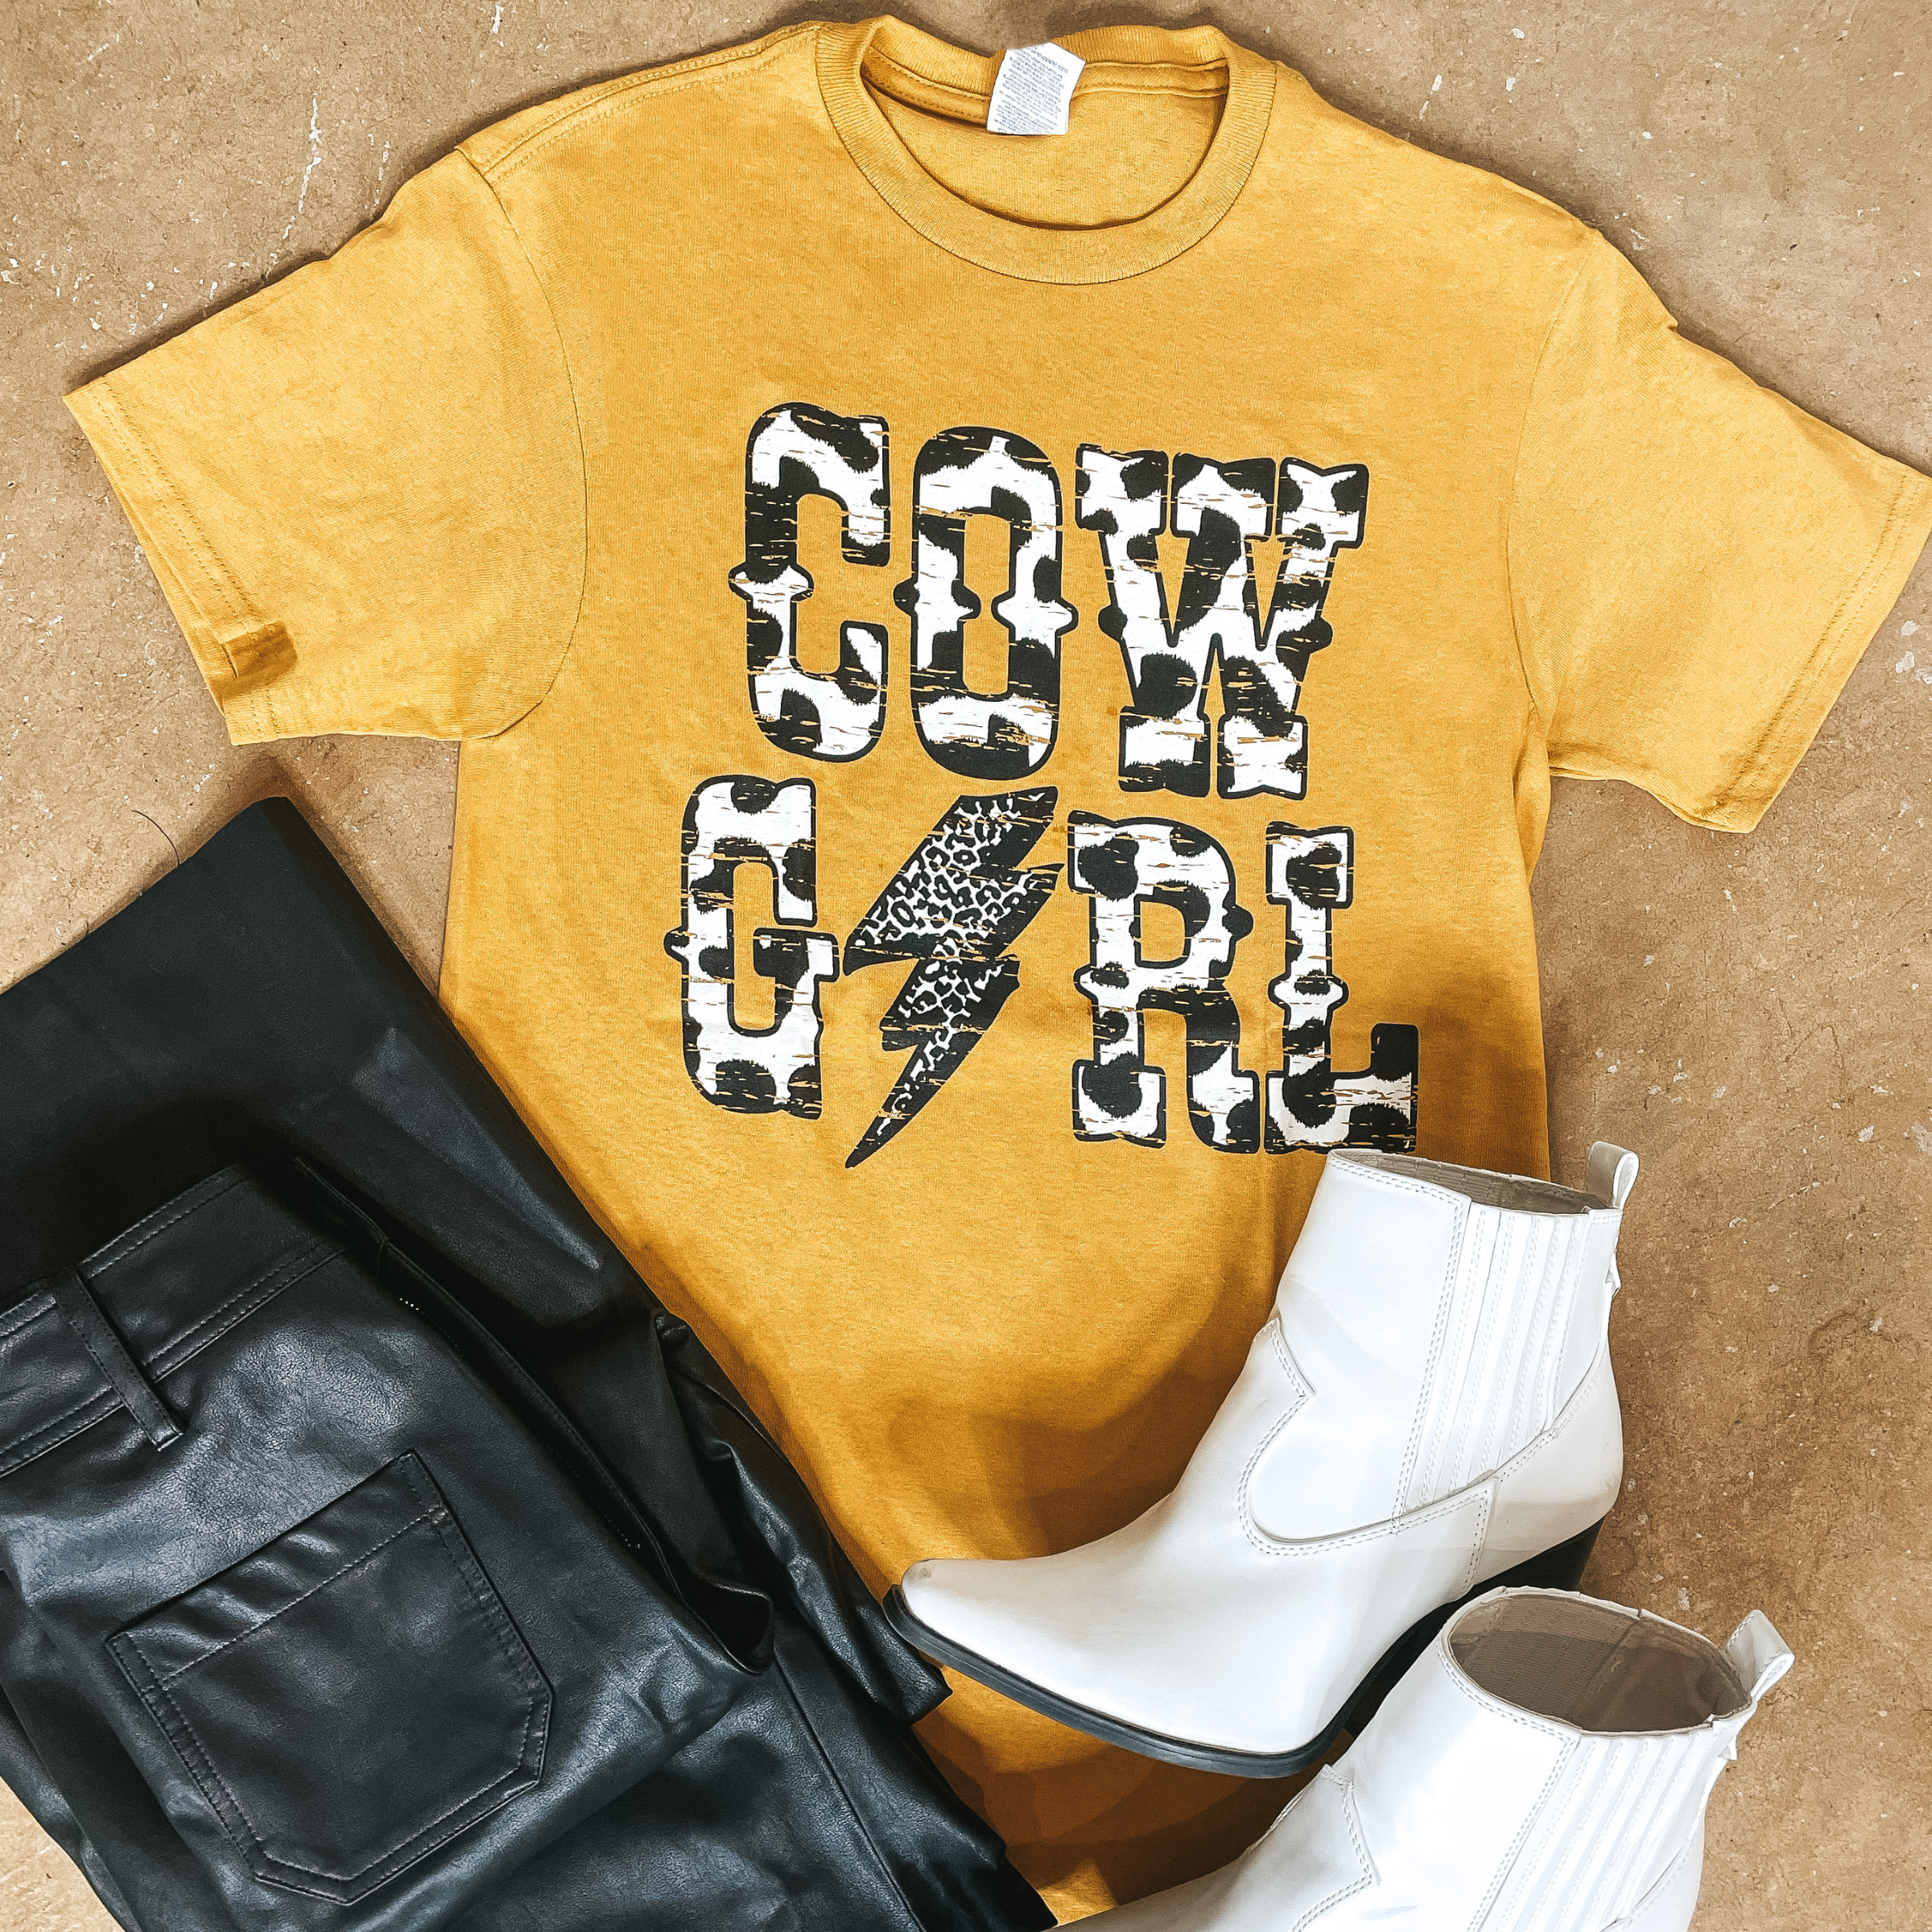 Cowgirl Lightning Bolt Short Sleeve Graphic Tee in Mustard Yellow - Giddy Up Glamour Boutique